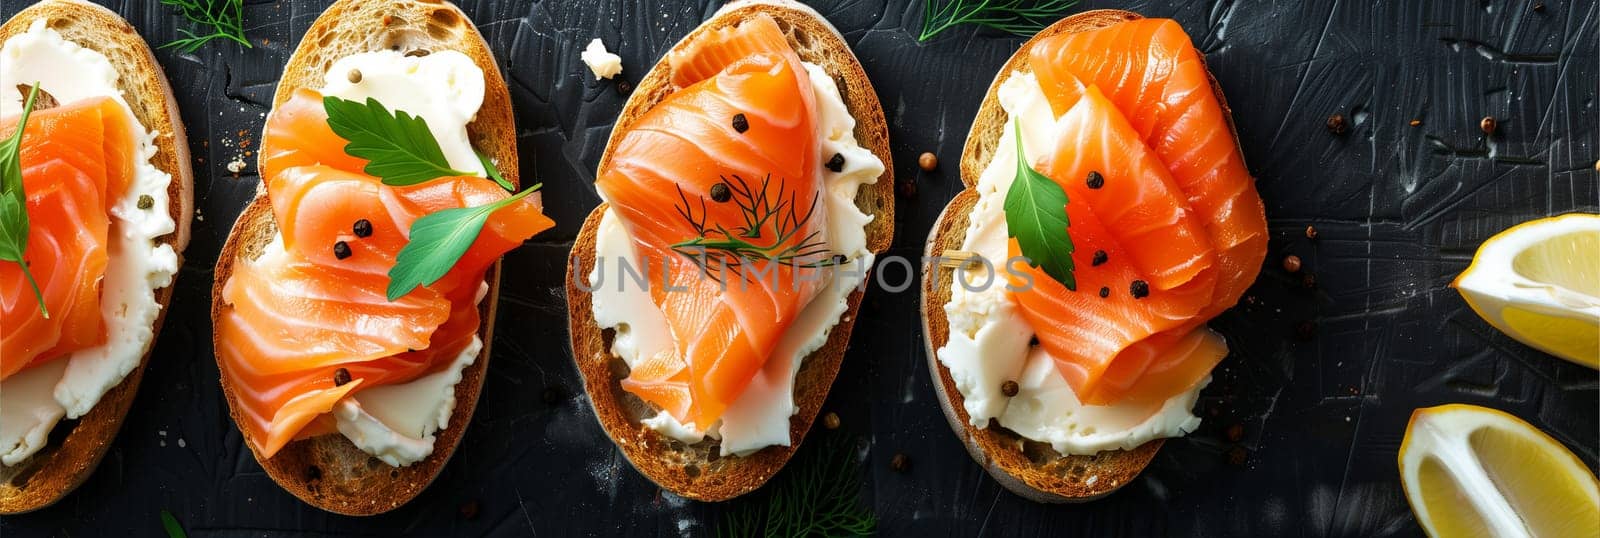 Slices of bread are topped with fresh salmon and melted cheese, creating a savory and satisfying meal option.